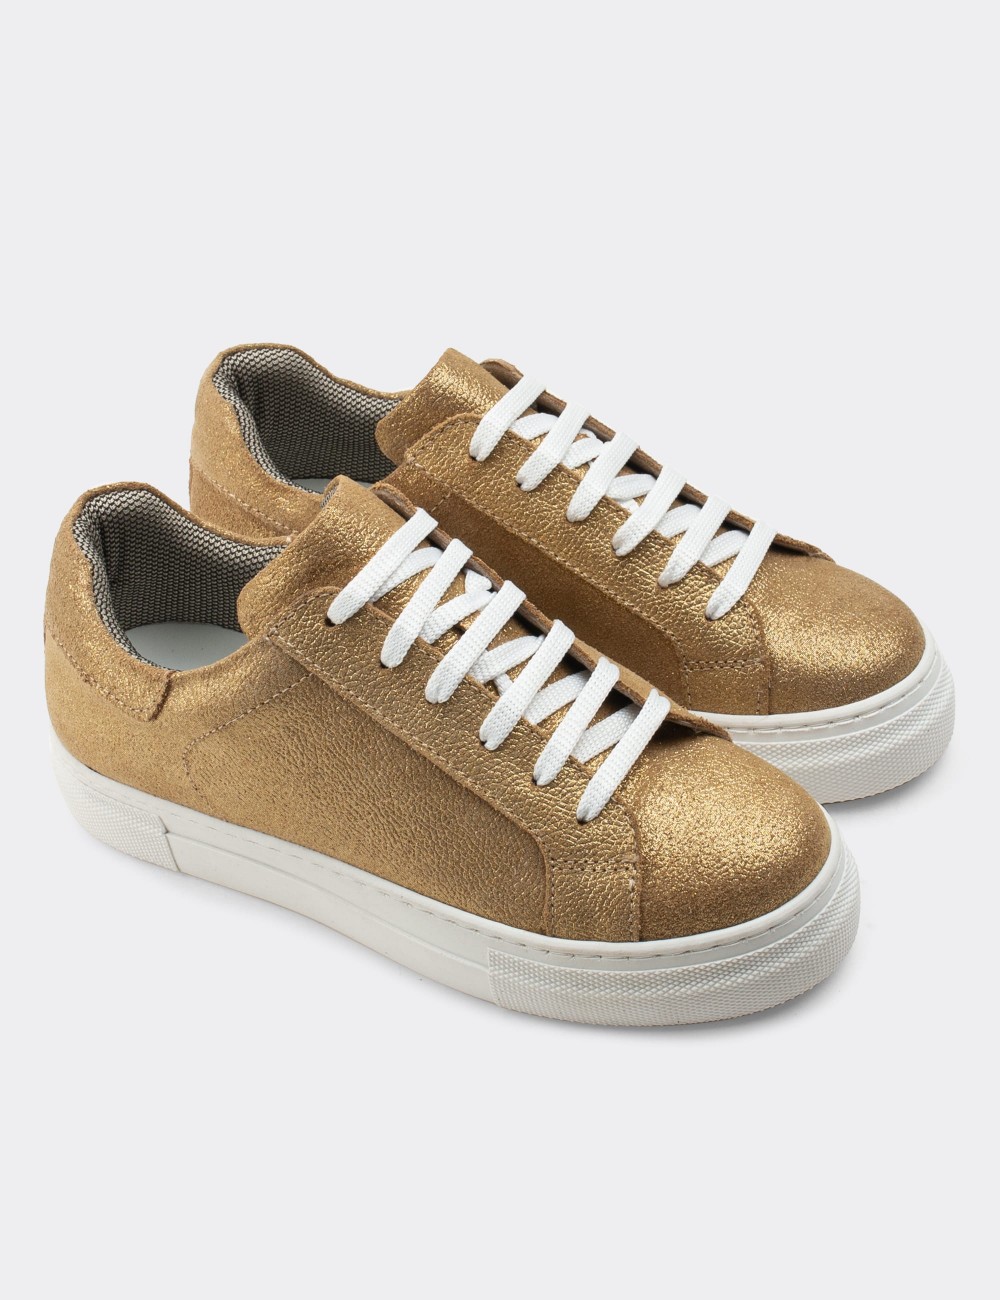 Gold Suede Leather Sneakers - Z1681ZALTC01